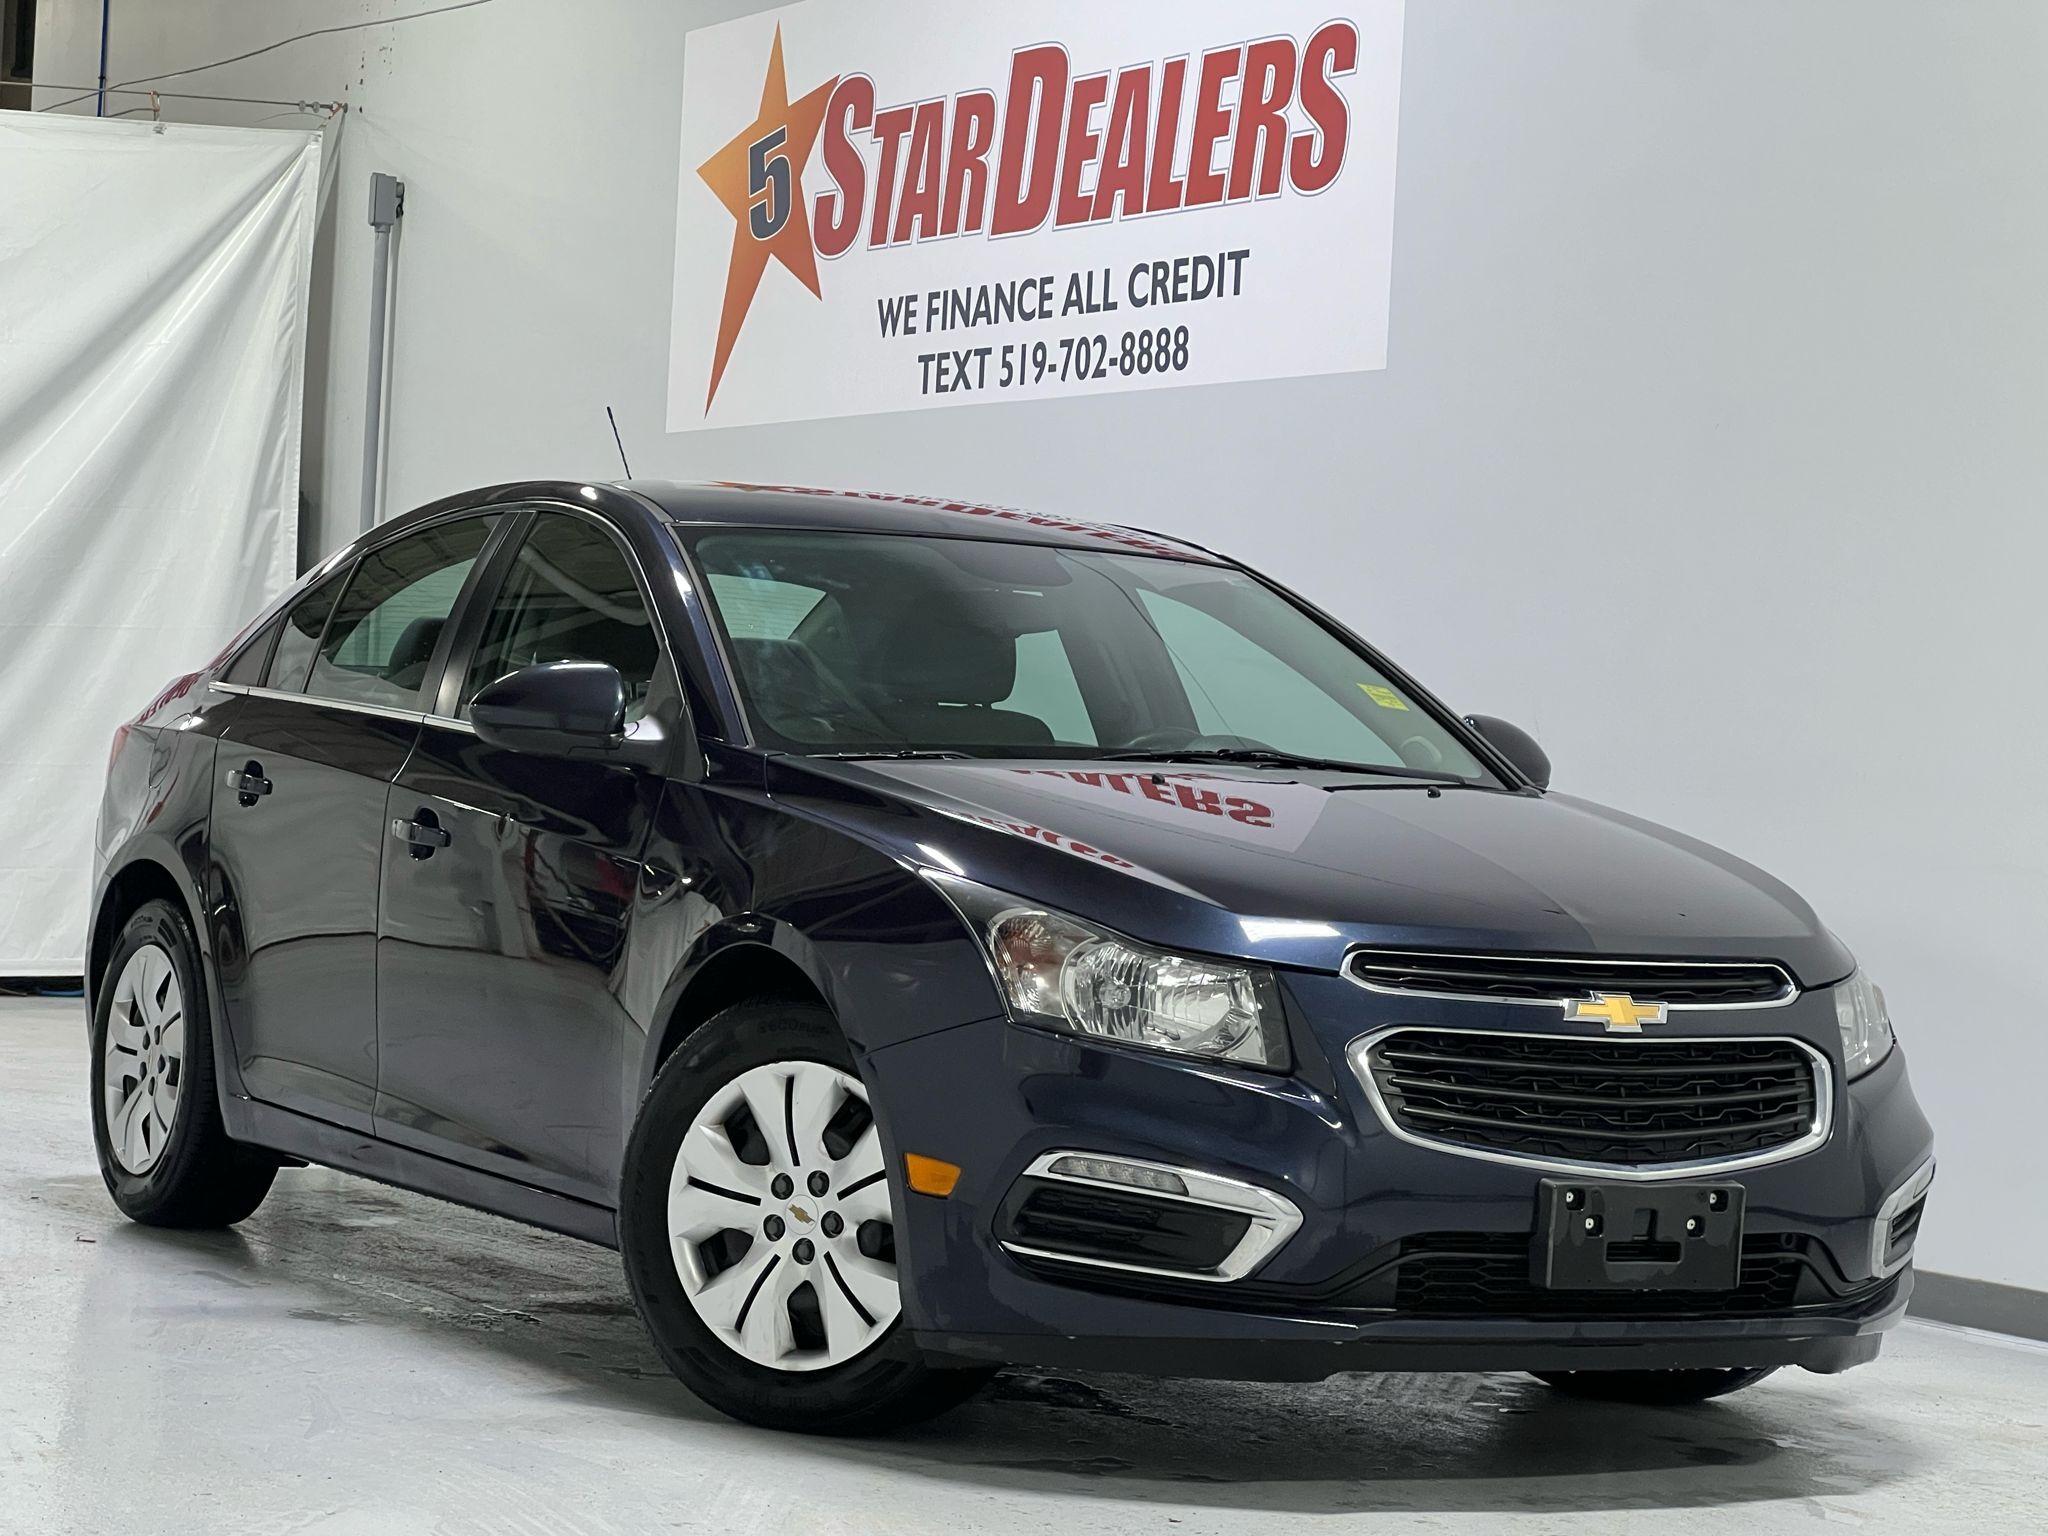 2015 Chevrolet Cruze GREAT CONDITION! MUST SEE! WE FINANCE ALL CREDIT!